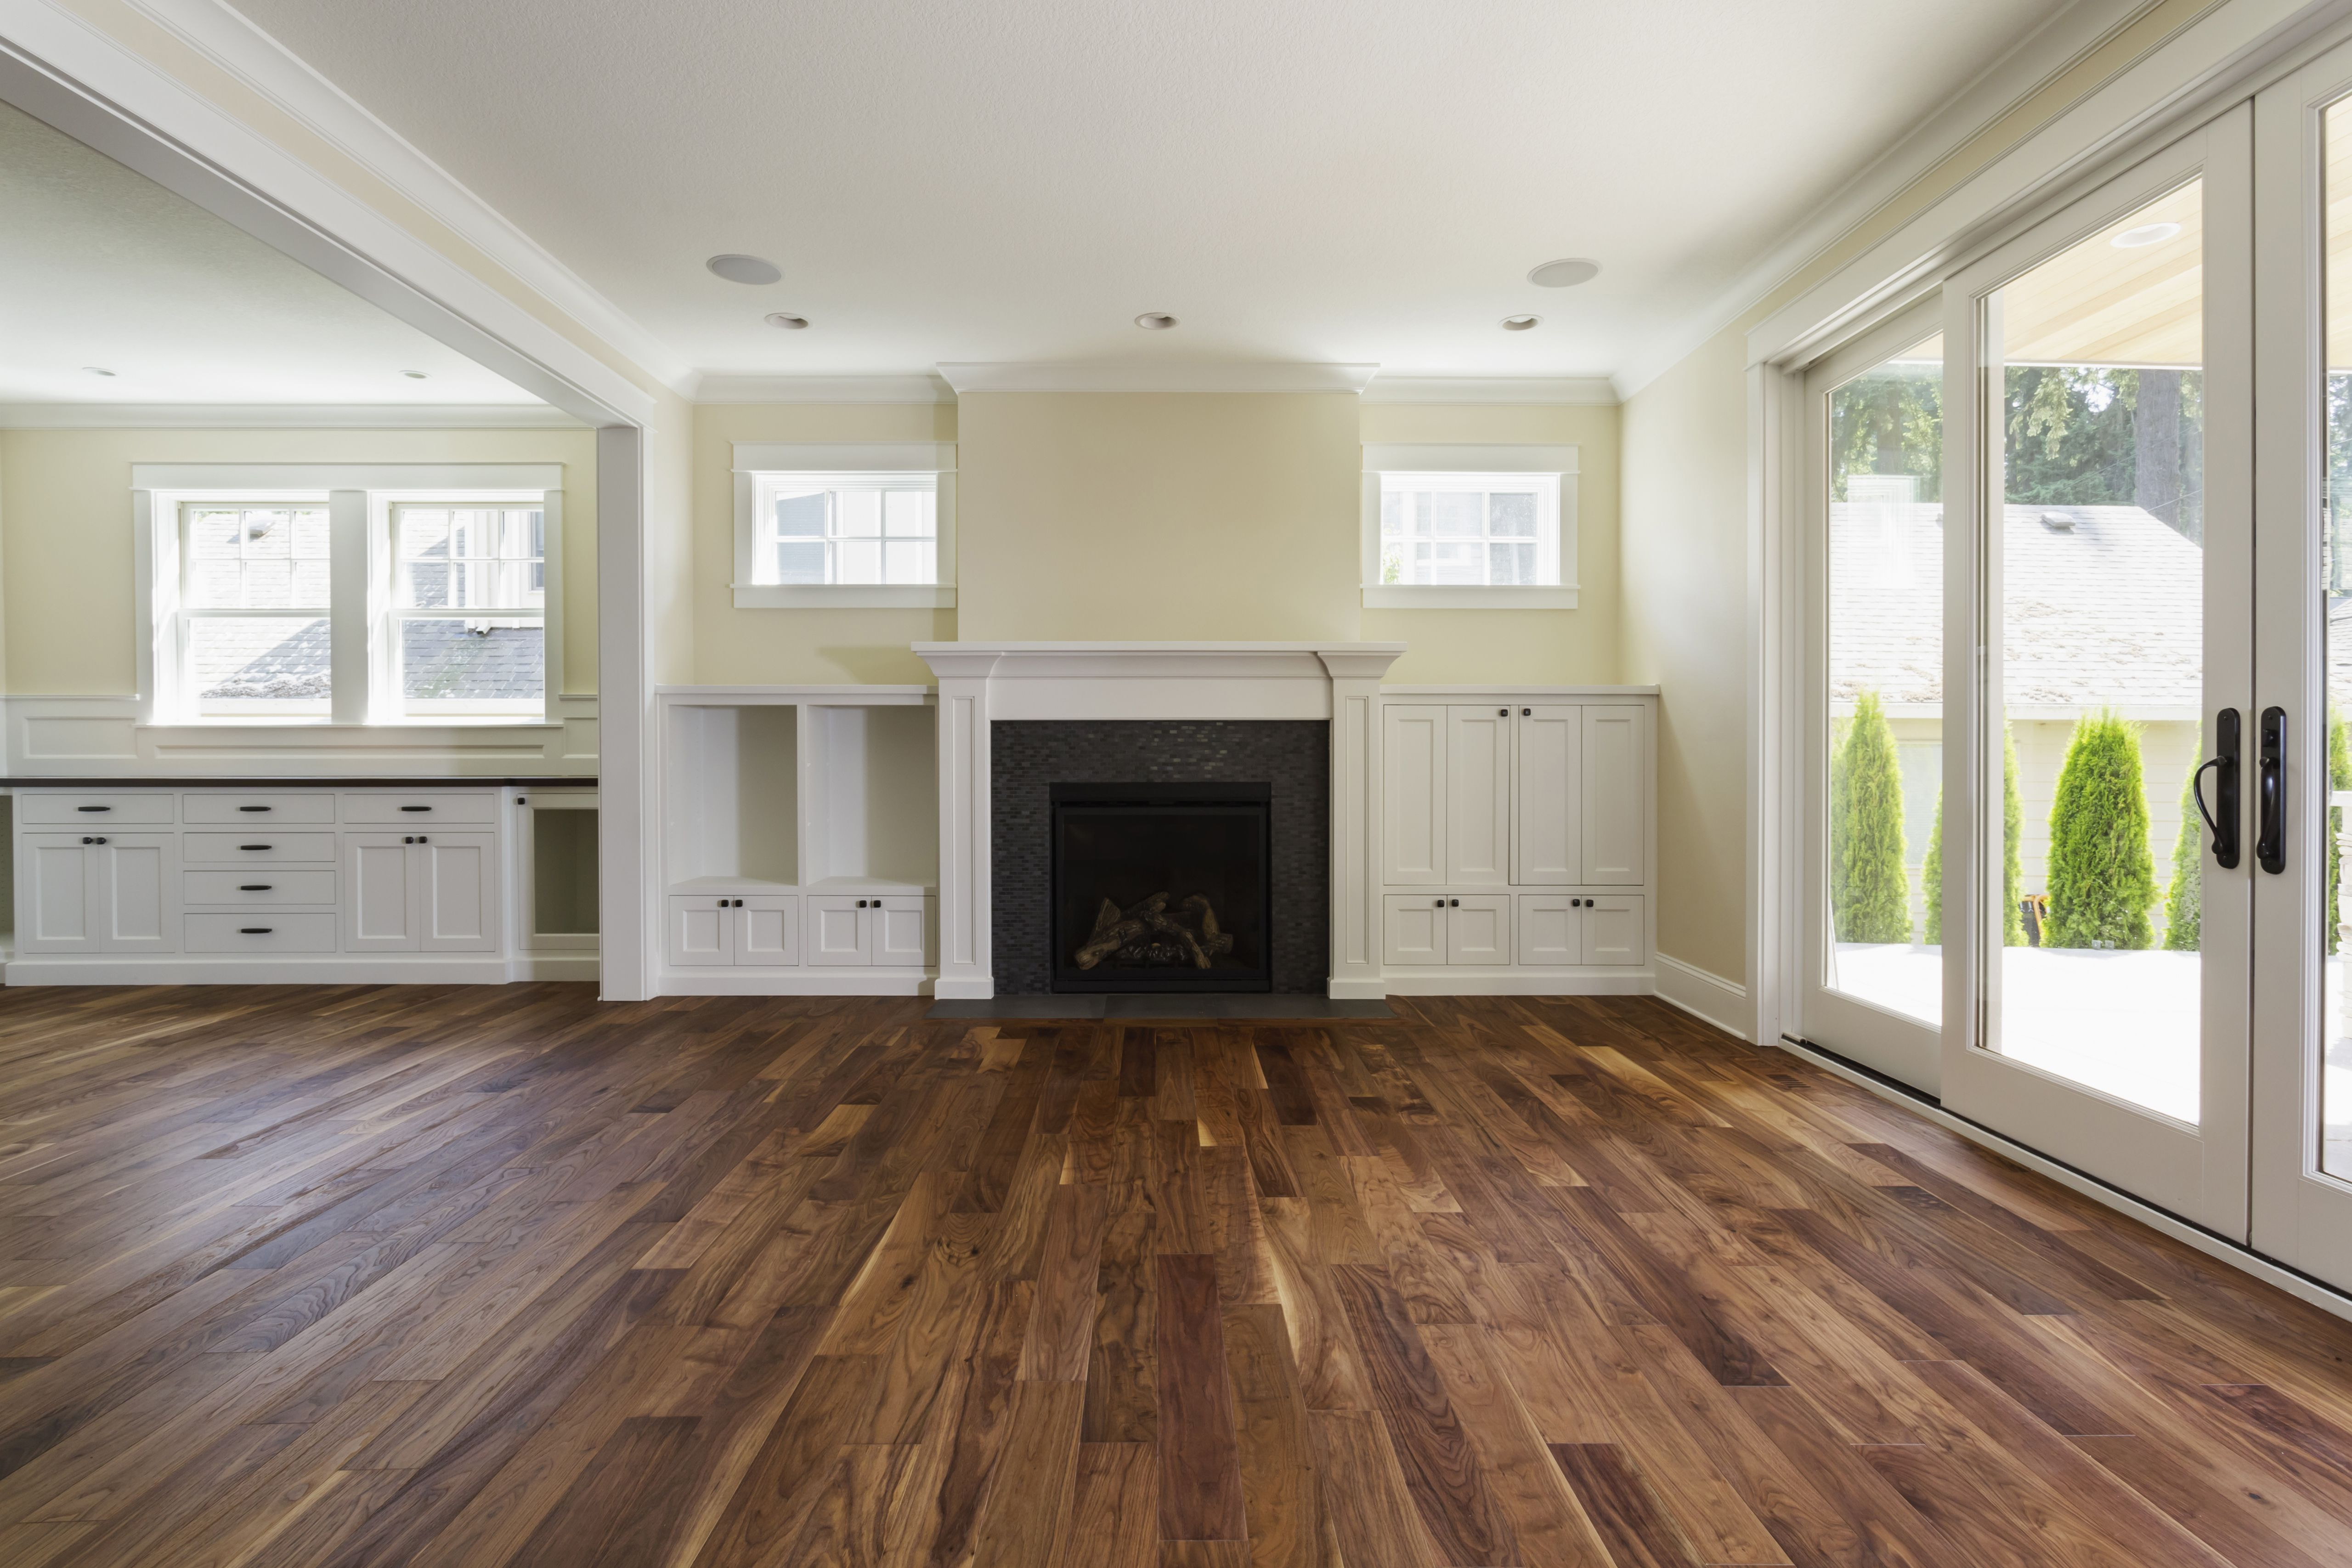 27 Lovely Hardwood Floor Repair Refinishing 2024 free download hardwood floor repair refinishing of the pros and cons of prefinished hardwood flooring pertaining to fireplace and built in shelves in living room 482143011 57bef8e33df78cc16e035397